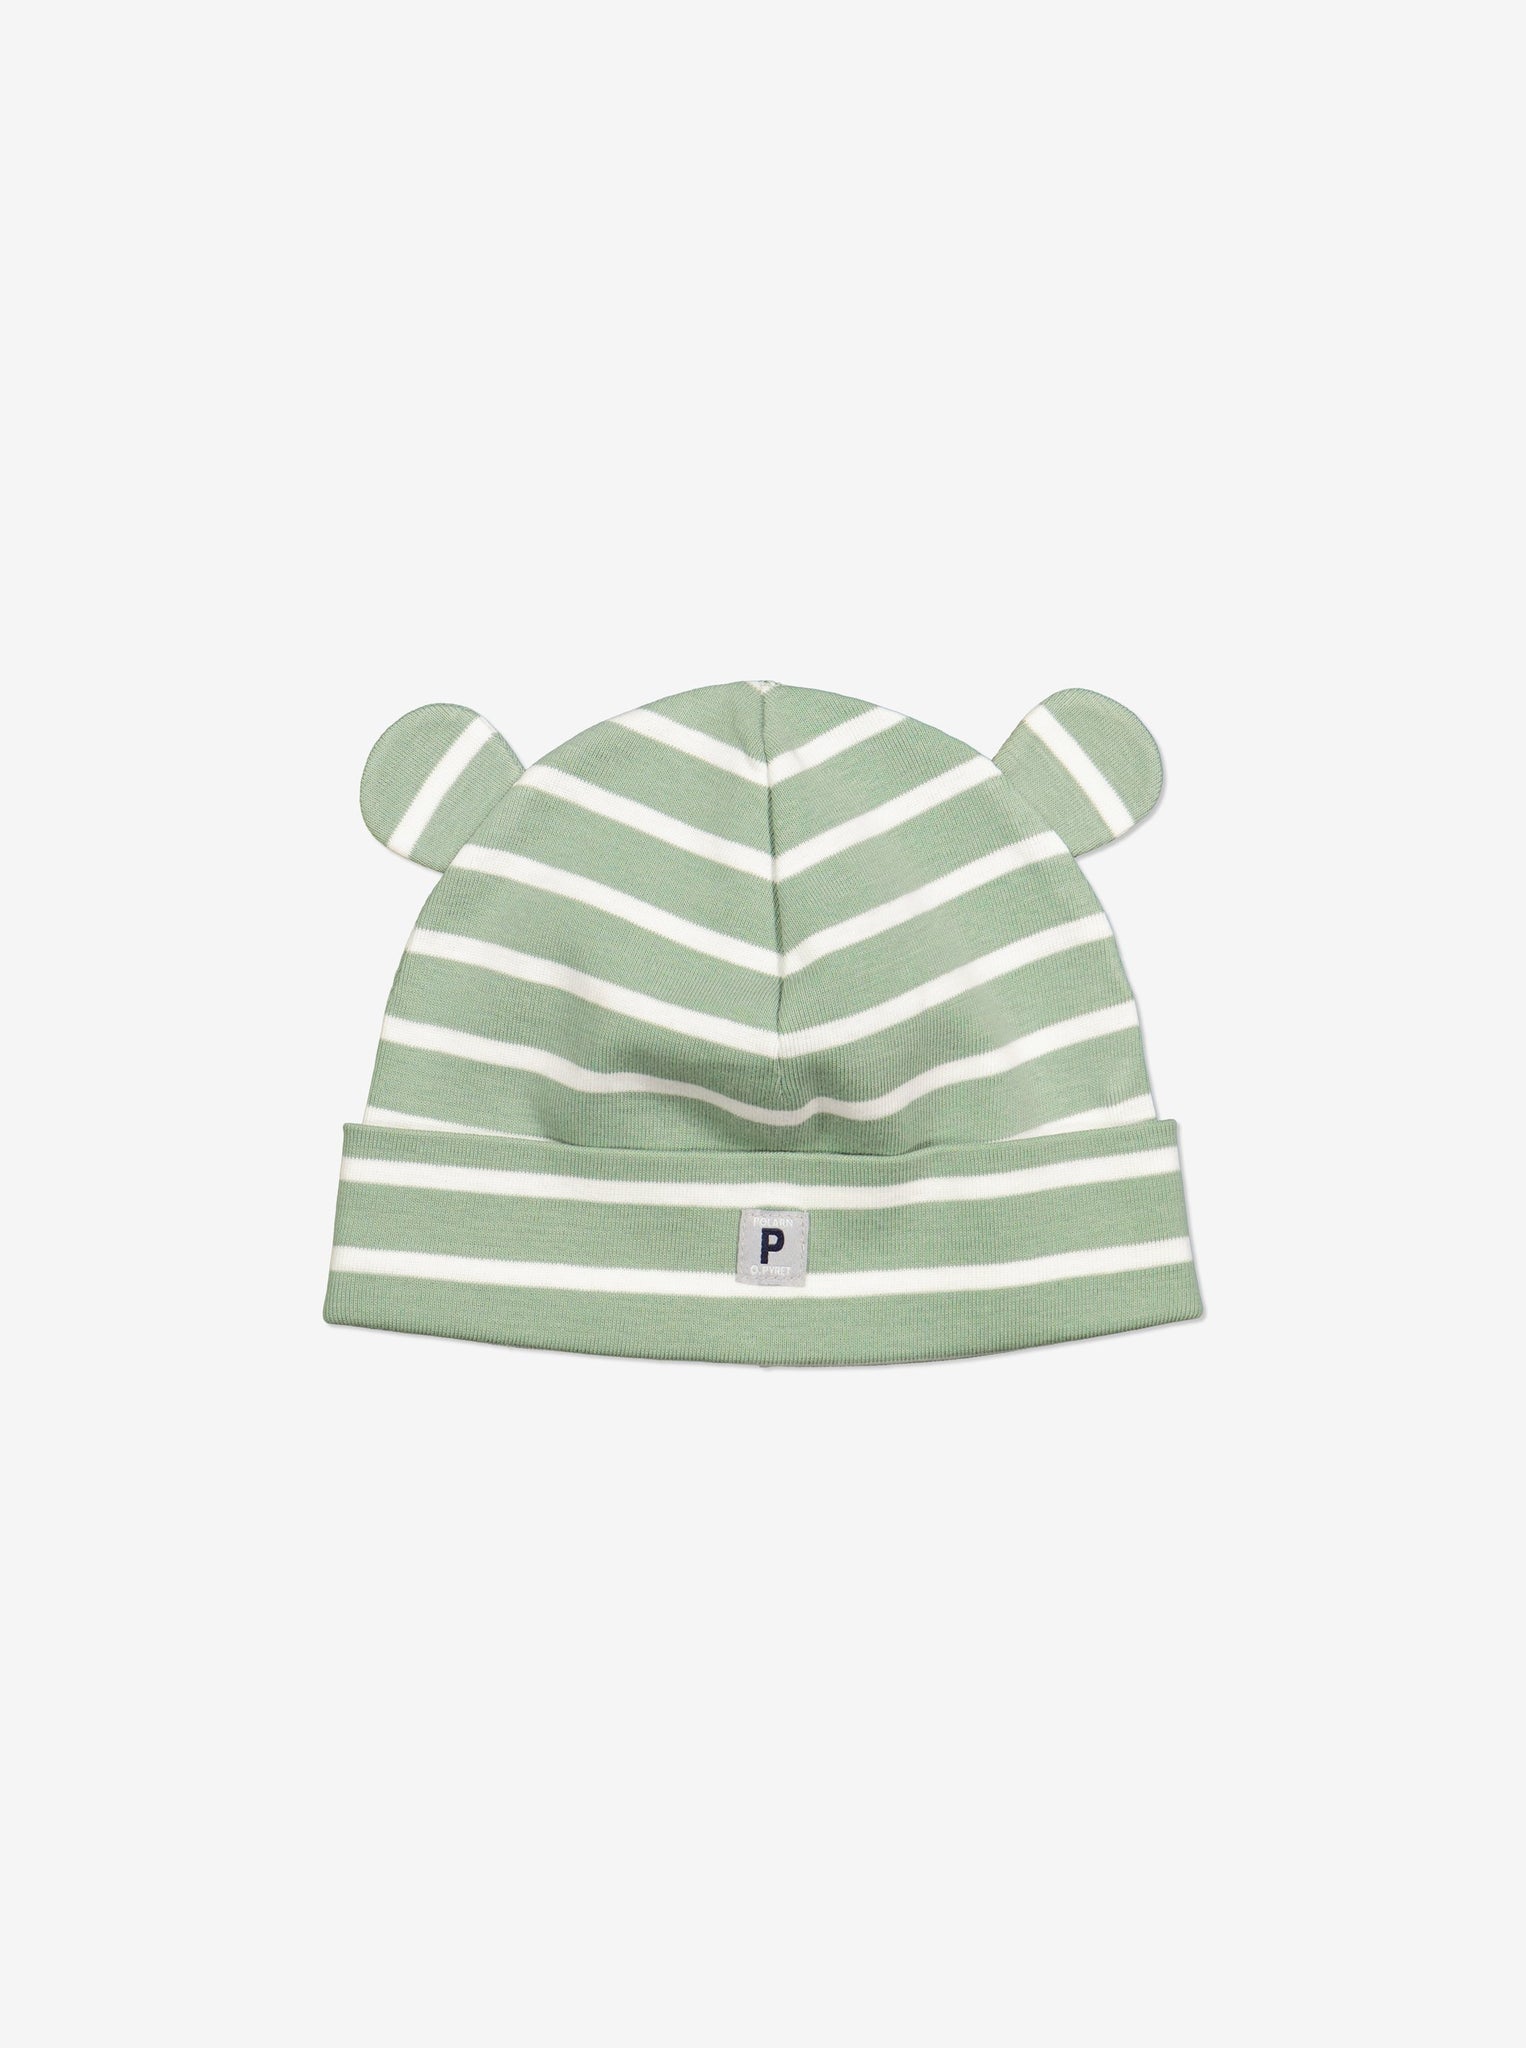  Organic Green Baby Beanie Hat from Polarn O. Pyret Kidswear. Made with 100% organic cotton.